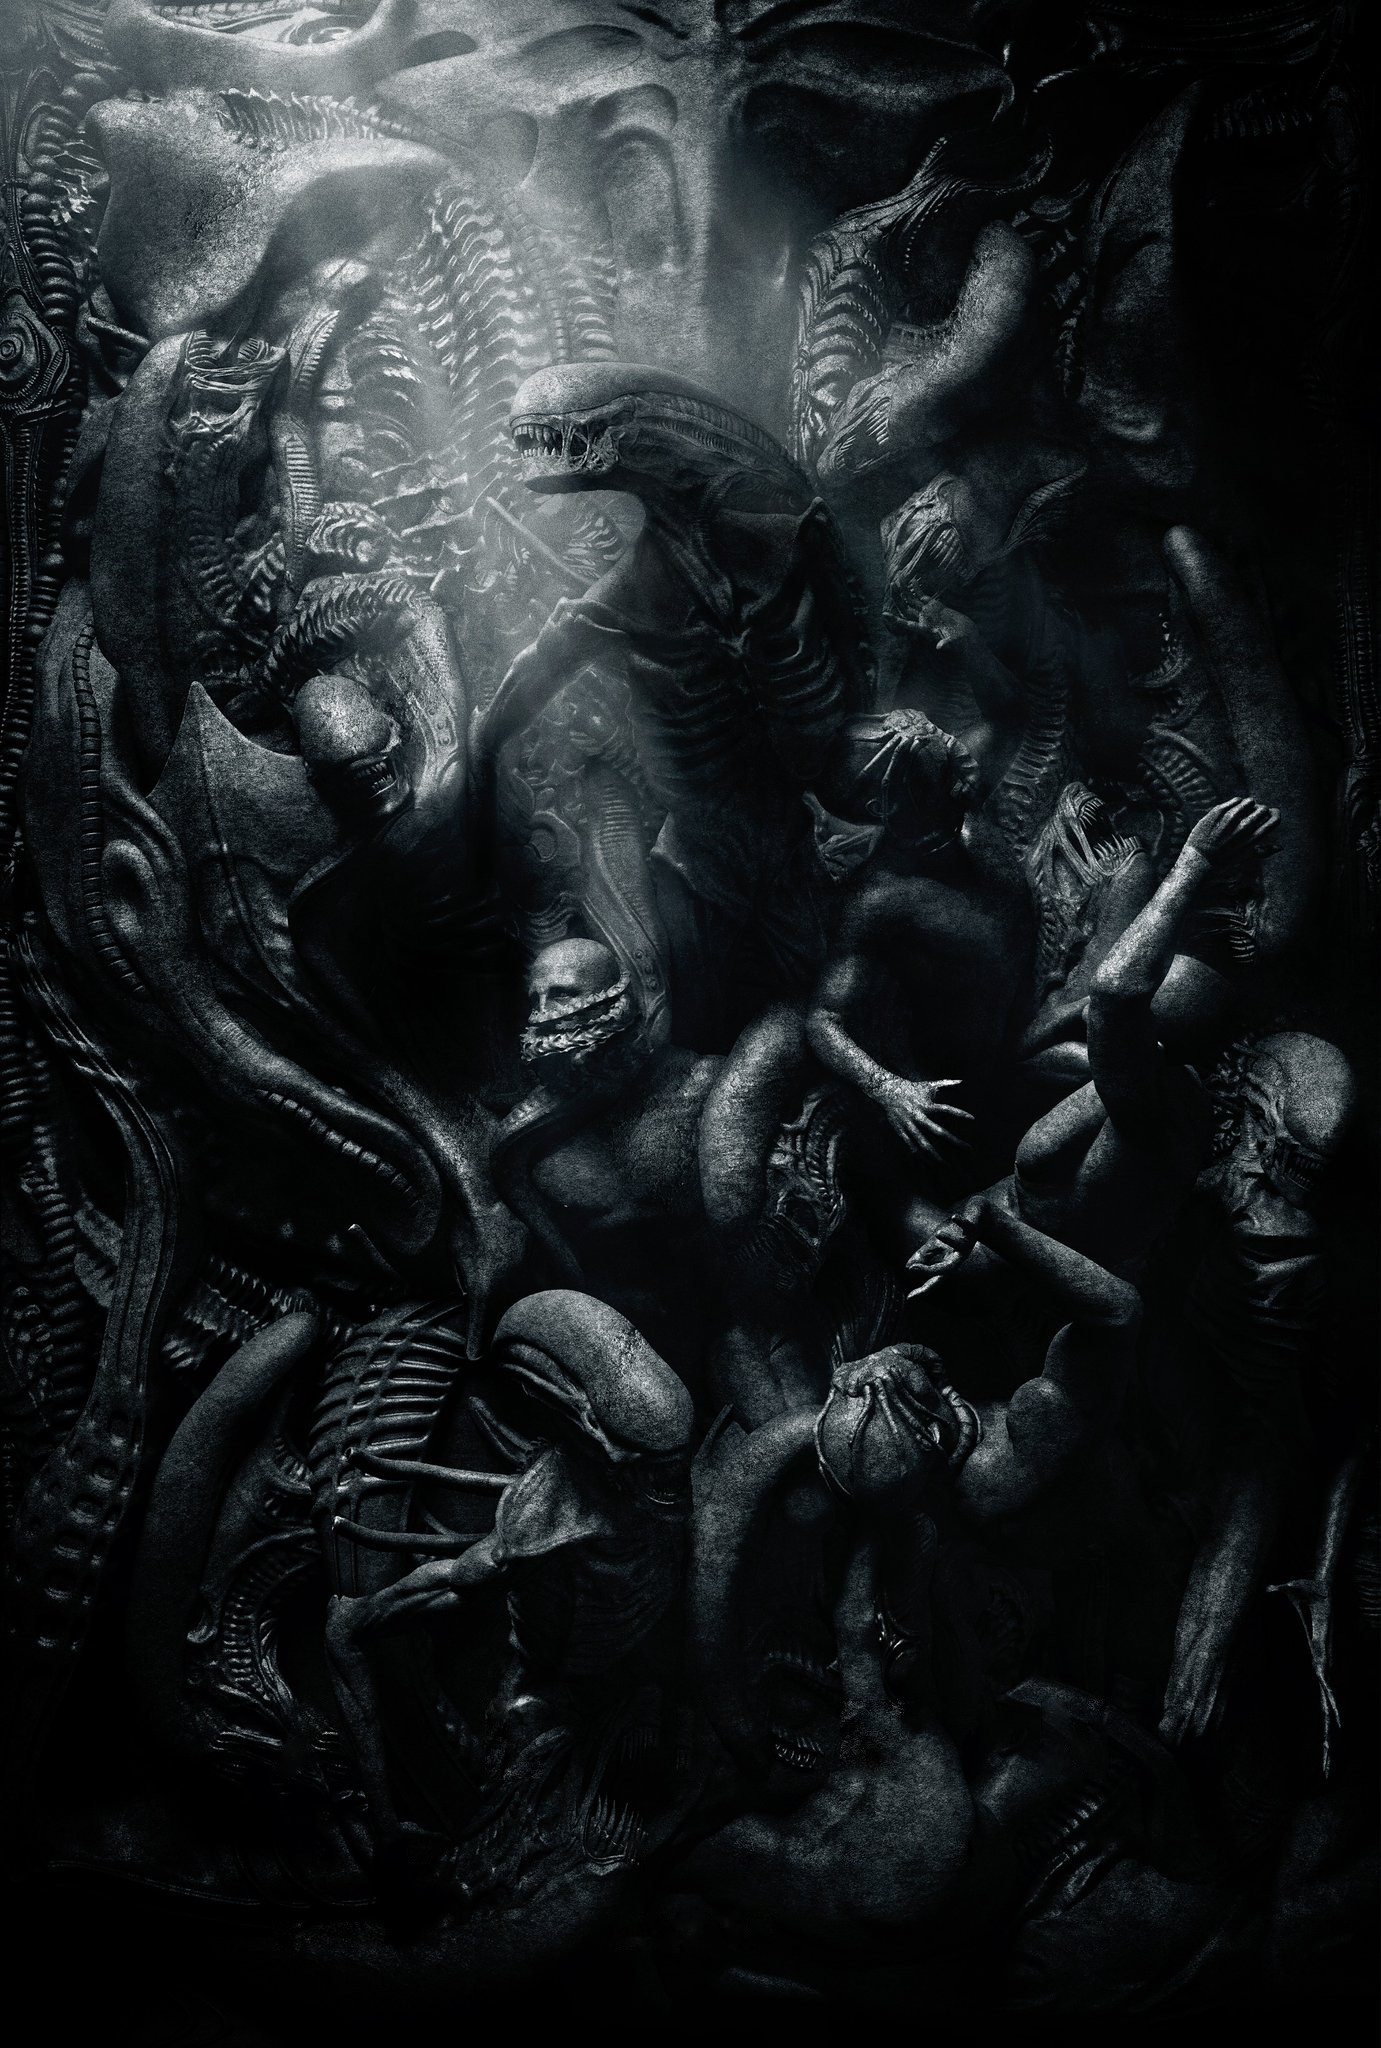 From Alien and Prometheus director Ridley Scott, the film opens on May 19  via Fox.